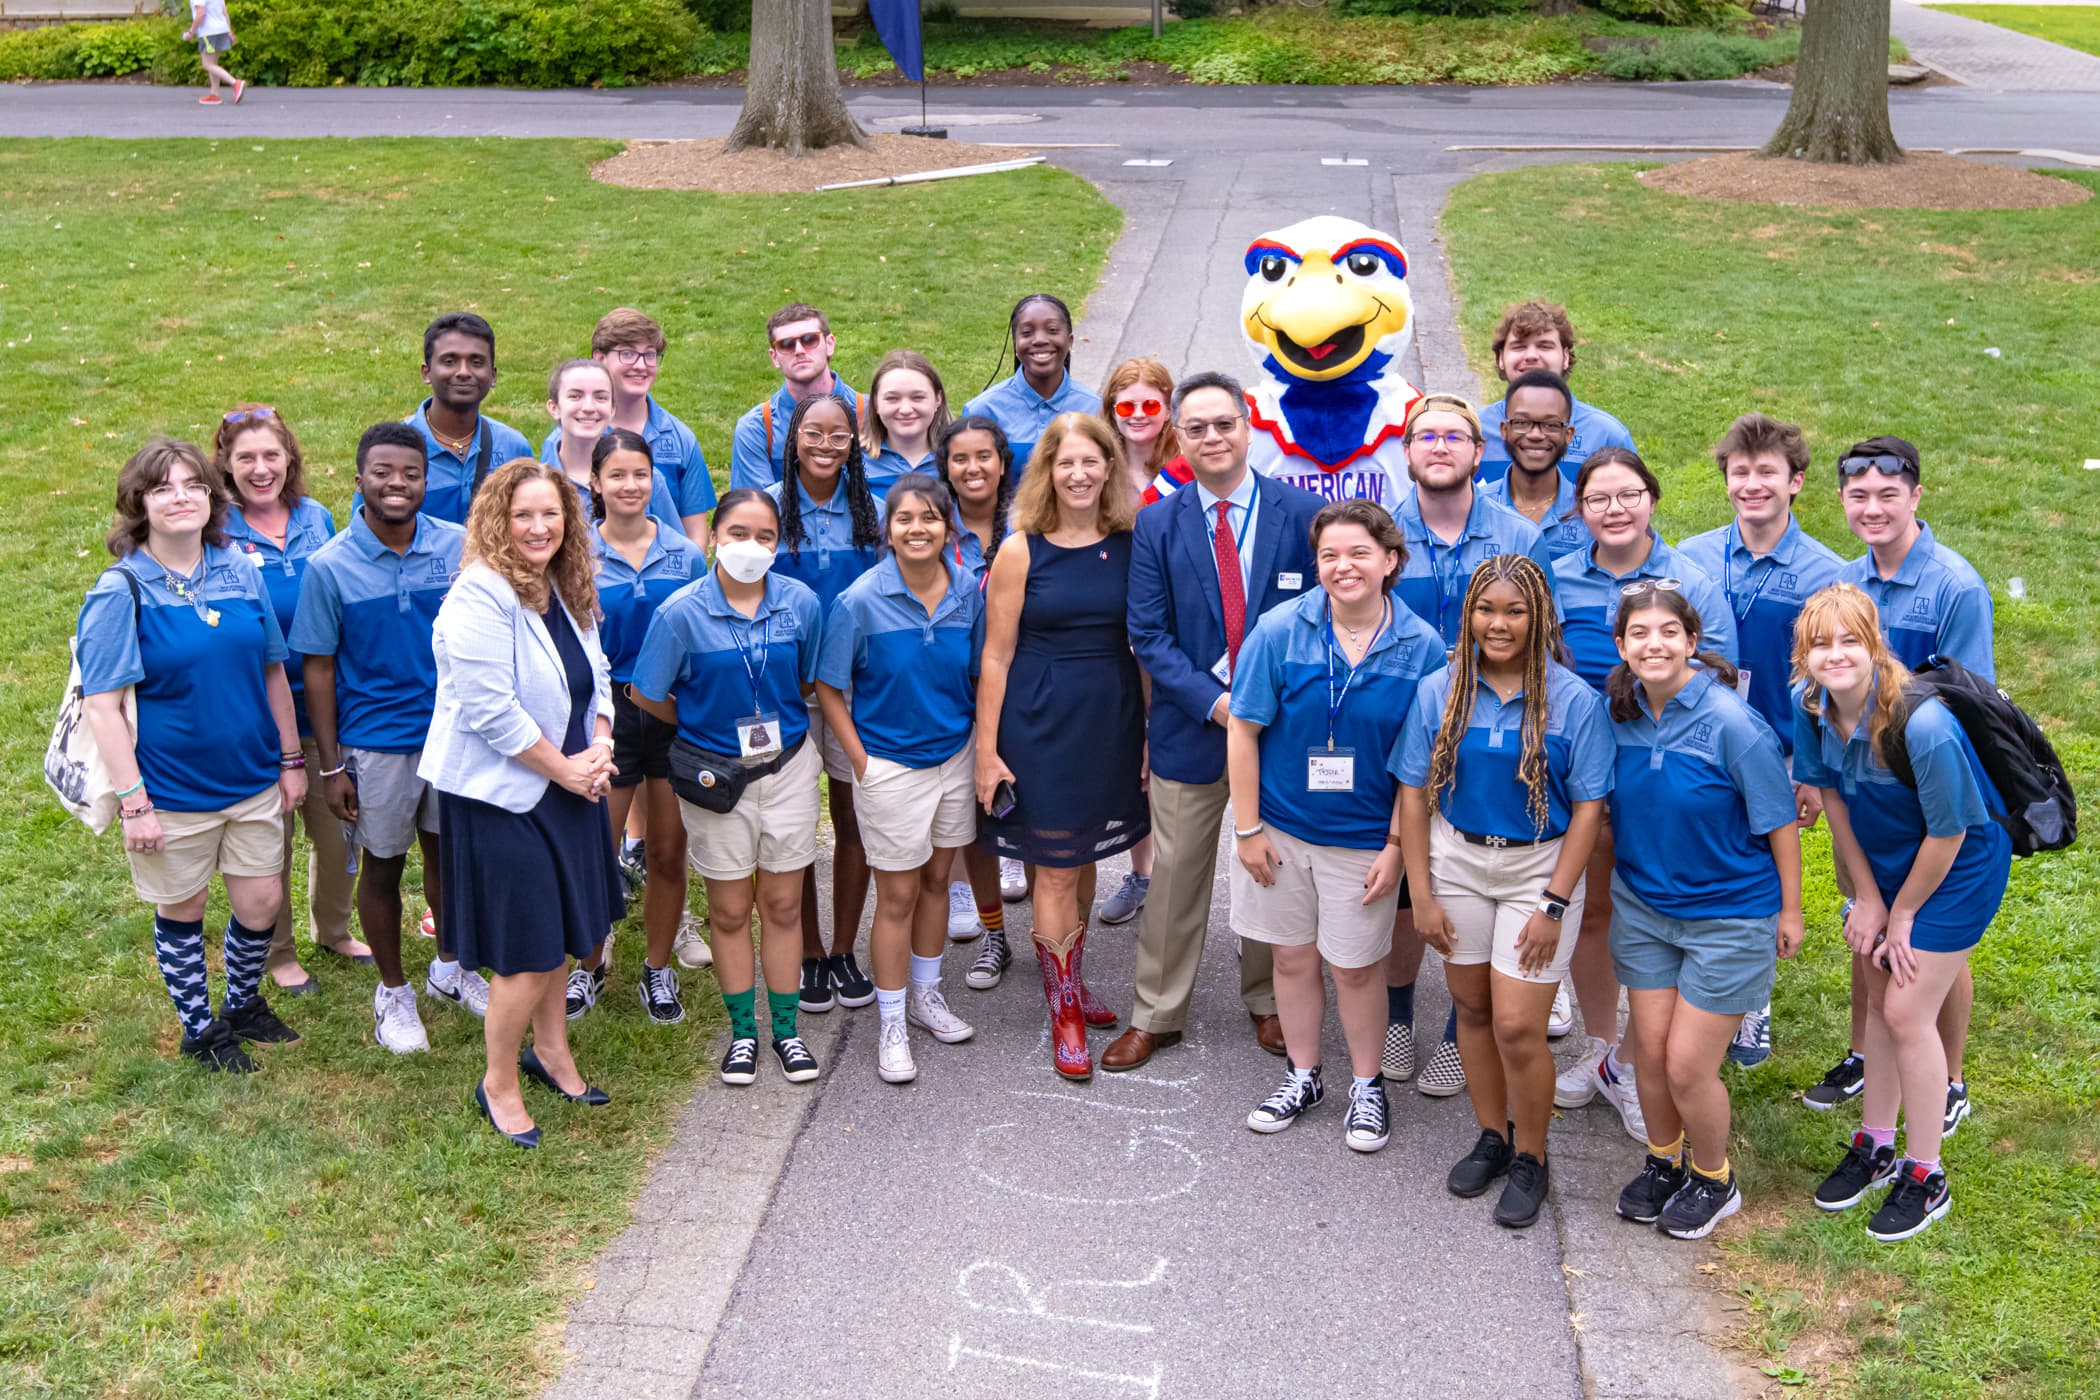 Orientation Leaders pose on the Quad with administrators and Clawed, AU's eagle mascot.